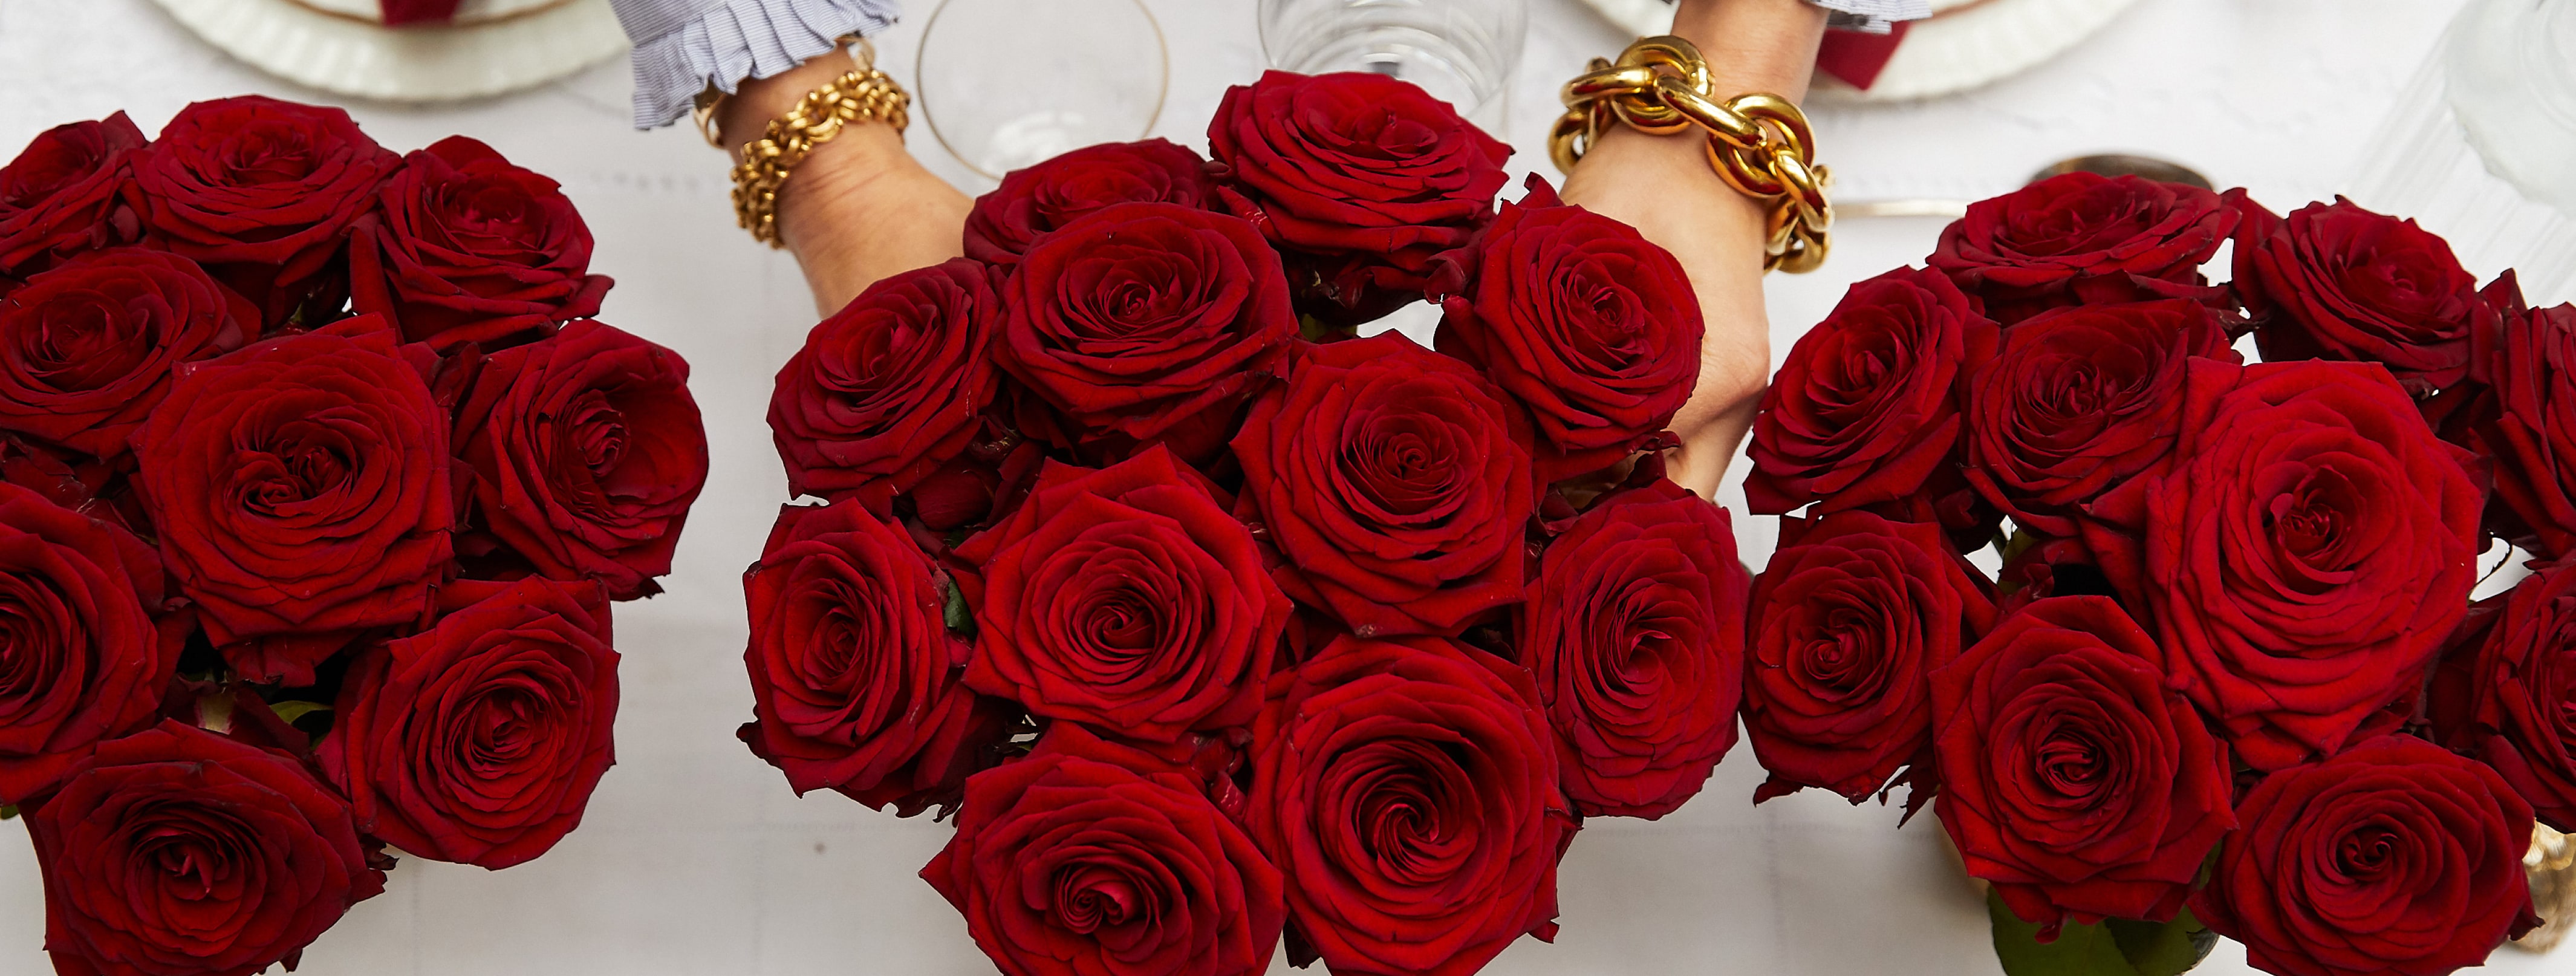 3 red rose bouquets